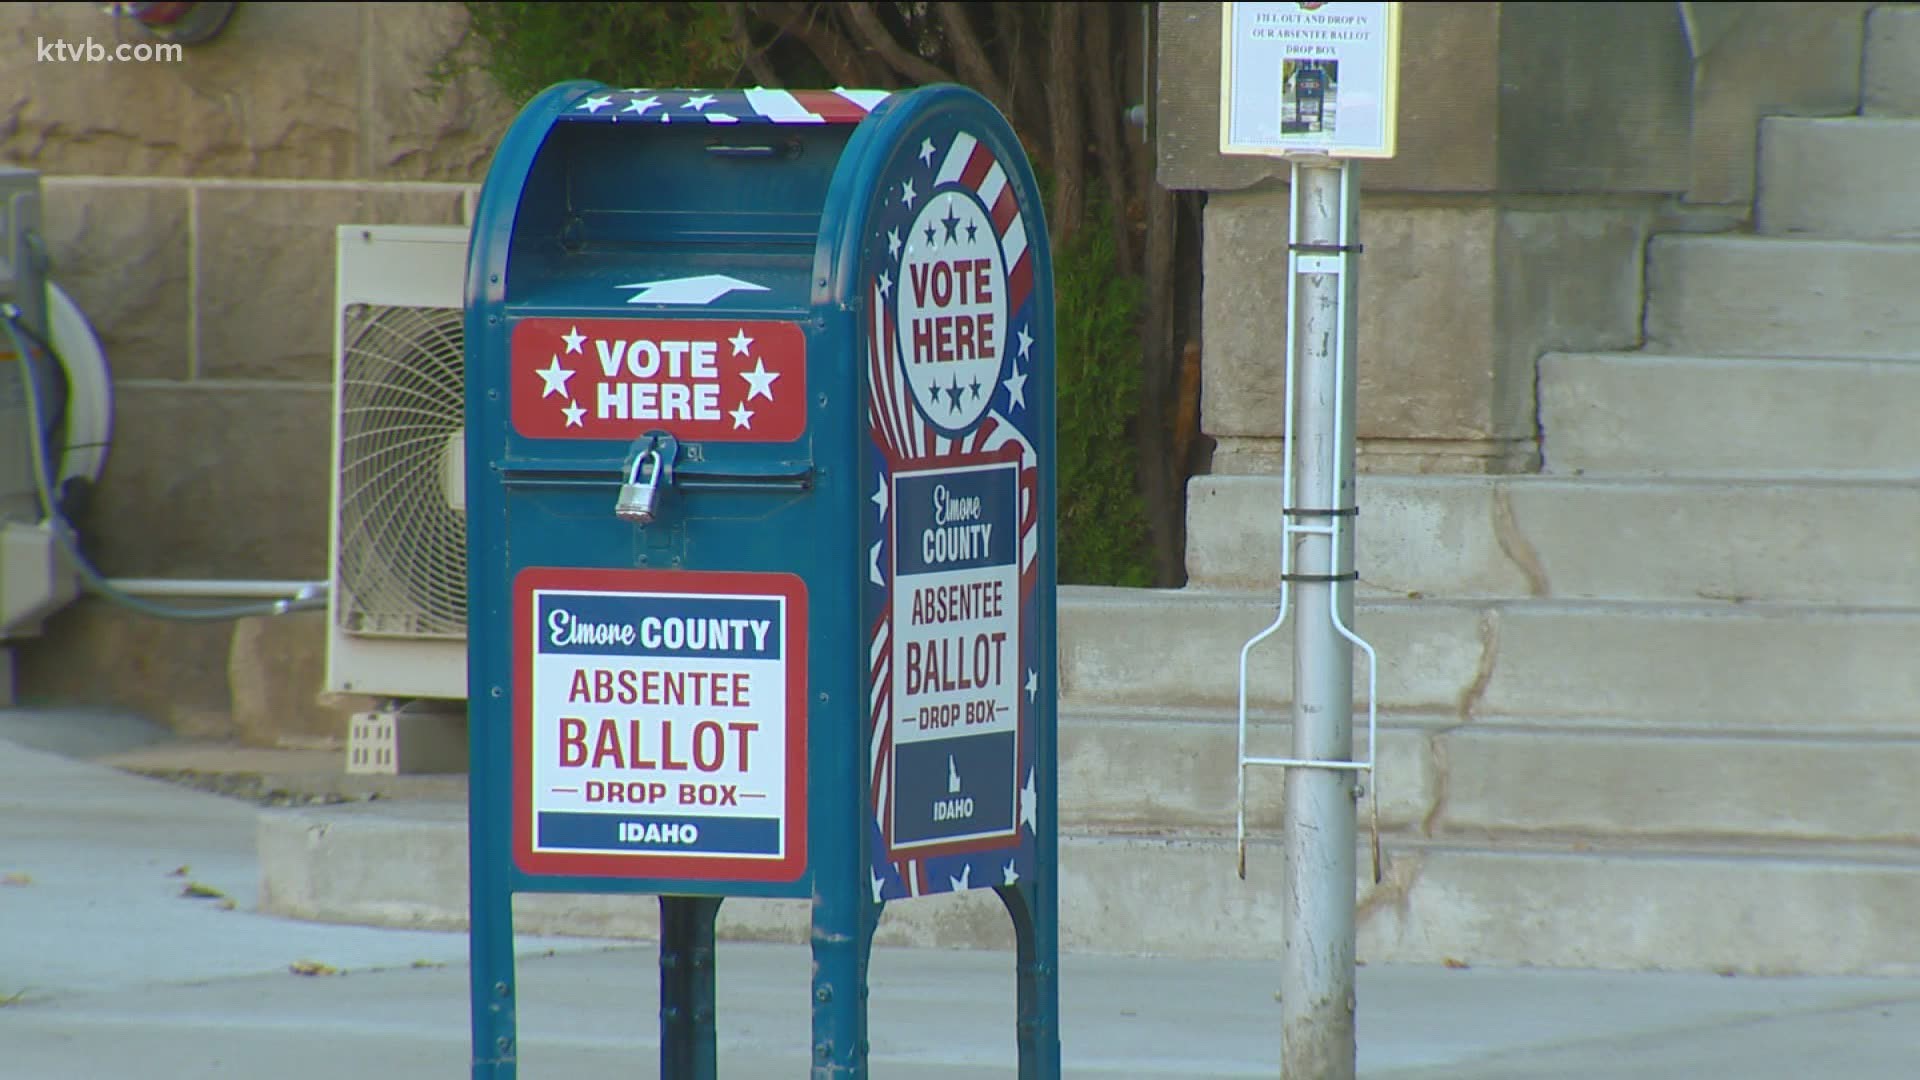 The county says the changes for the November election are due to the COVID-19 pandemic, but some are calling it voter suppression.